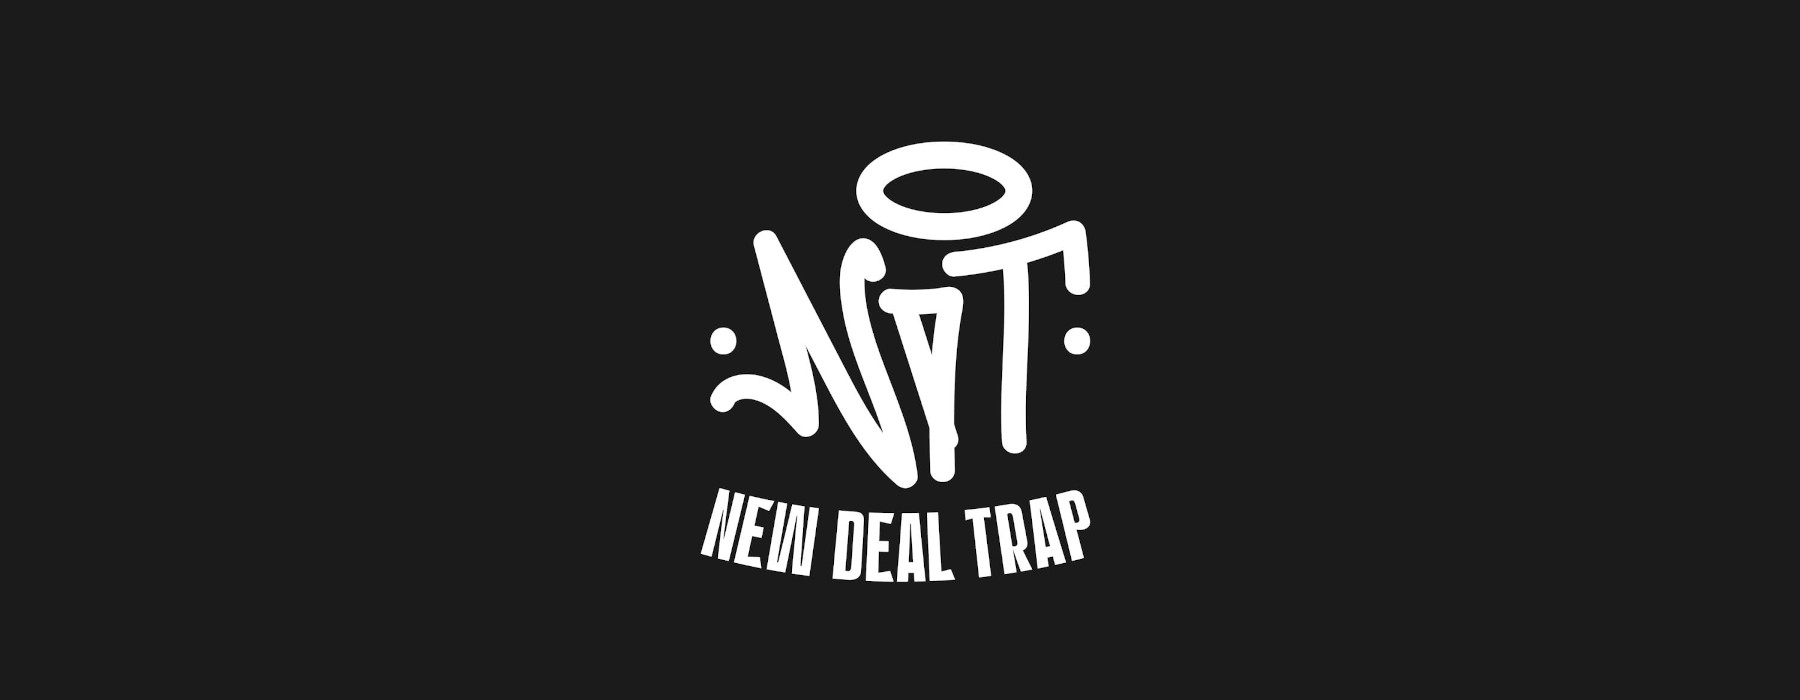 New Deal Trap